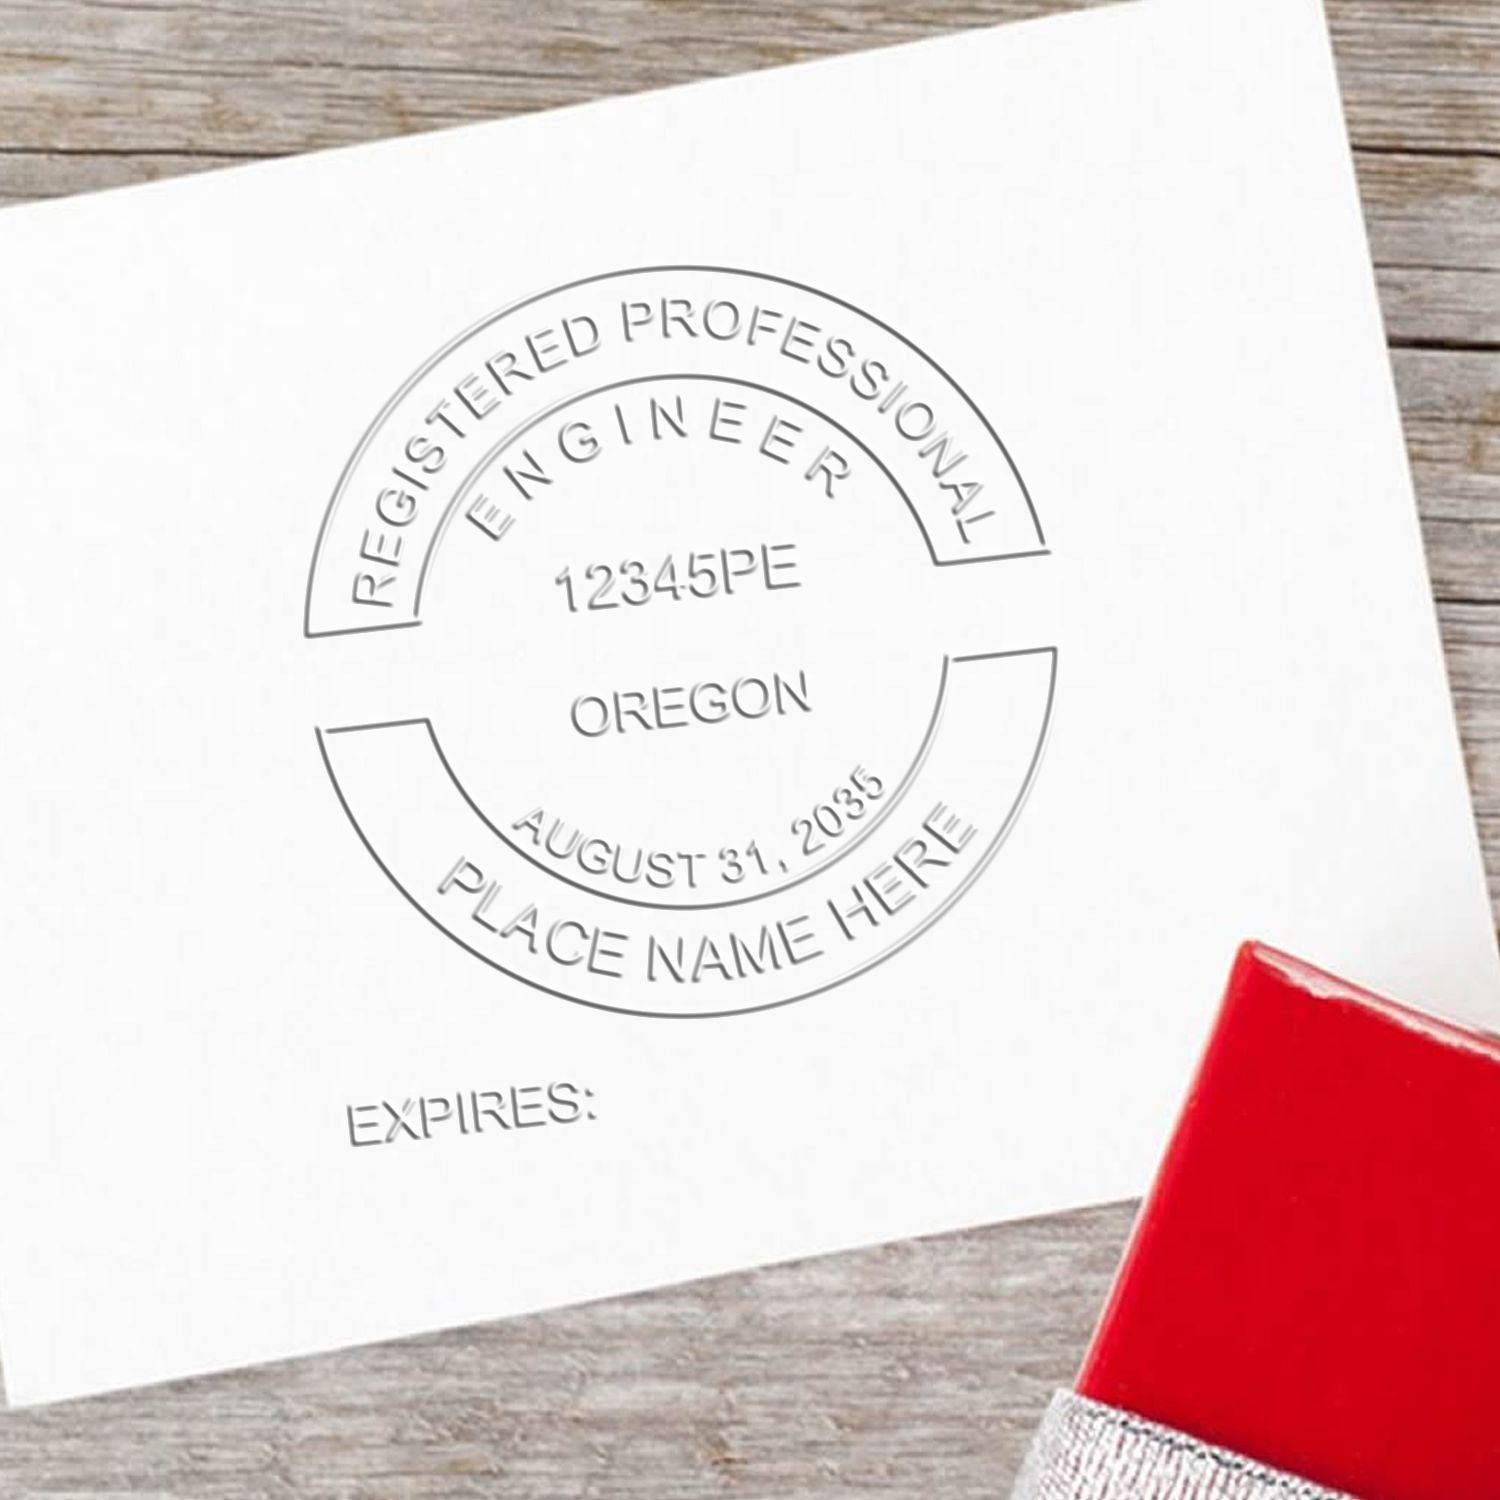 A photograph of the Oregon Engineer Desk Seal stamp impression reveals a vivid, professional image of the on paper.